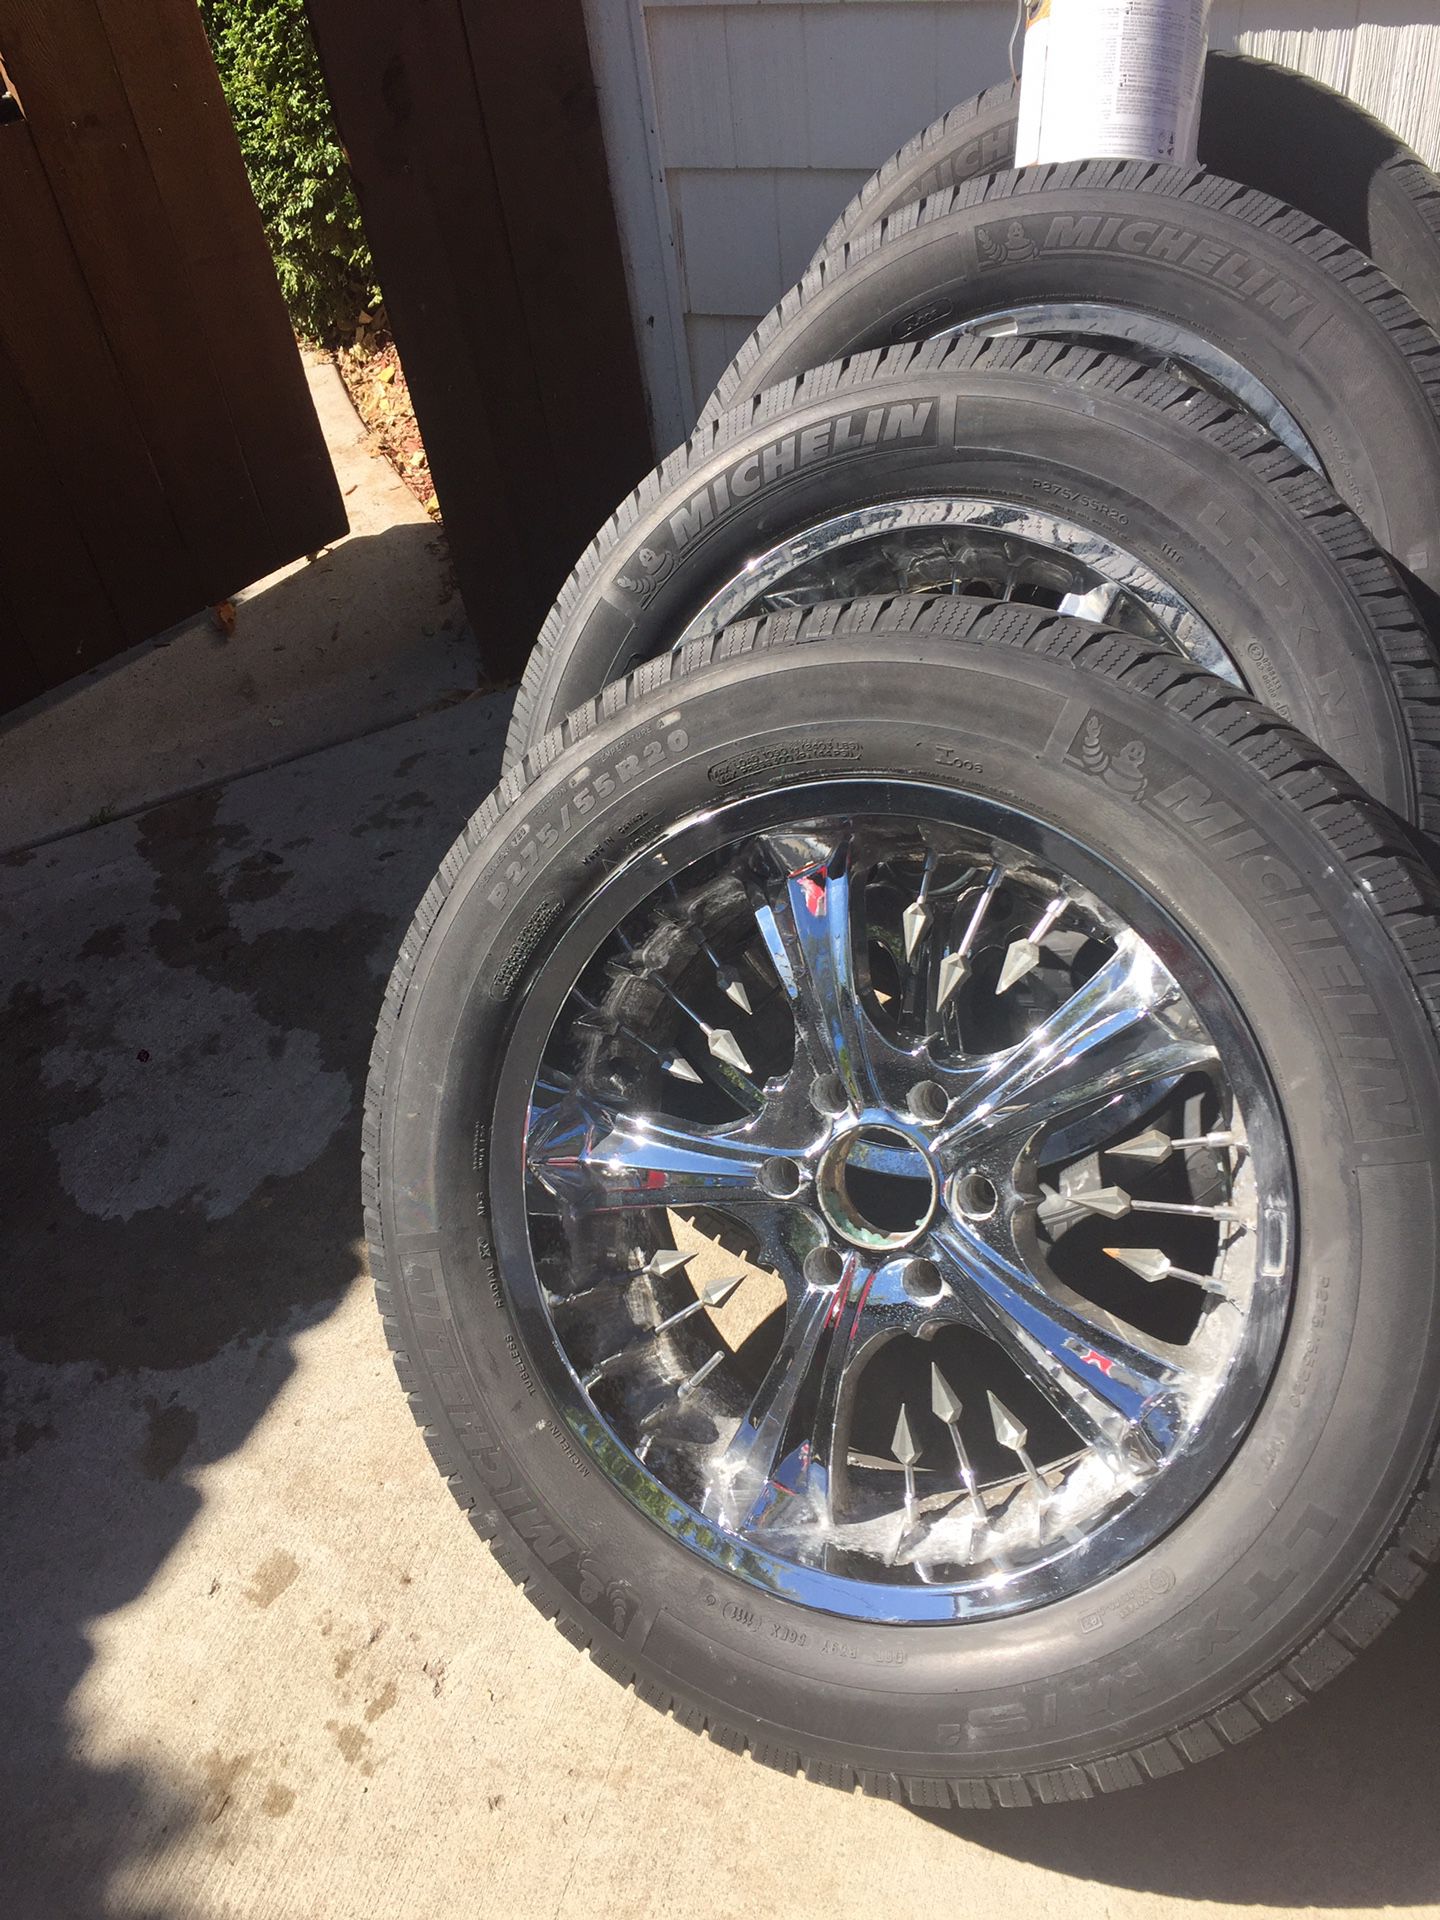 4 Tires and rims Chevy or gmc pickup truck $300. No less